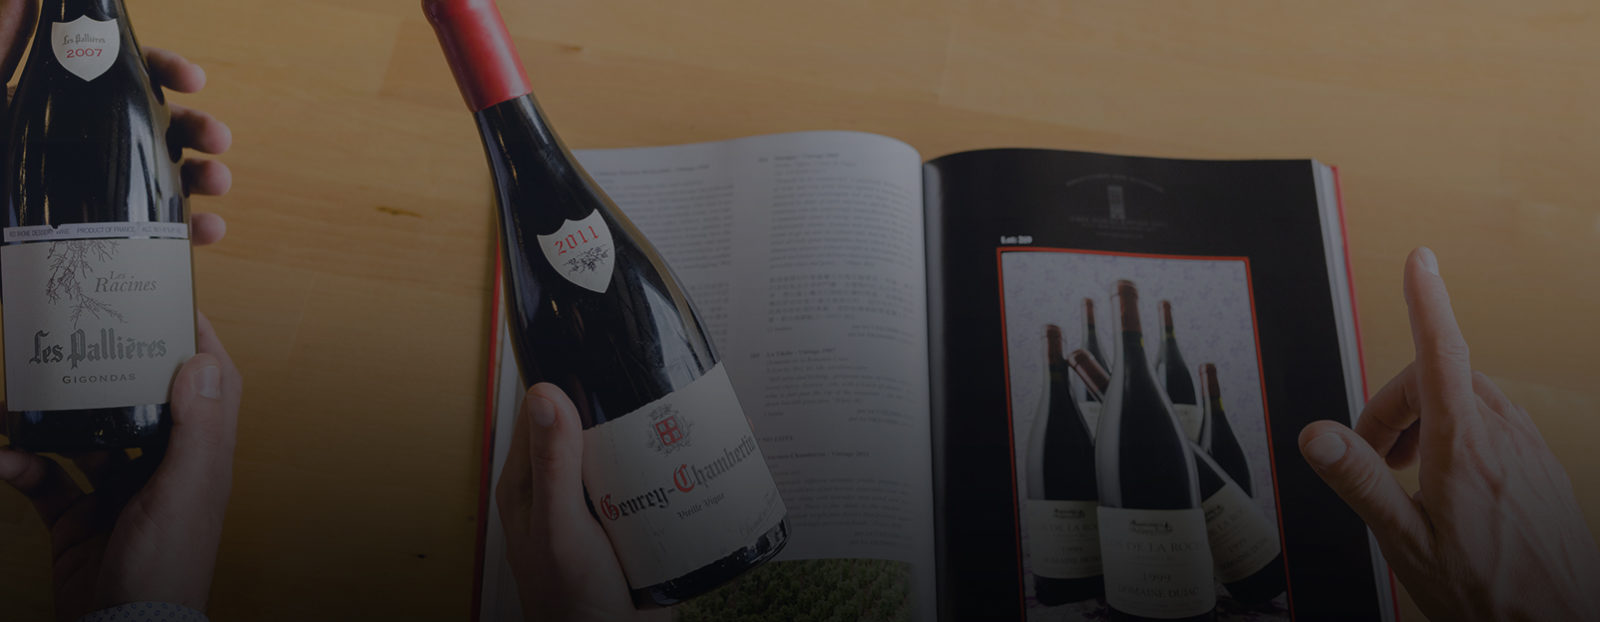 A wine bottle is compared to information in a catalogue for wine appraisals.